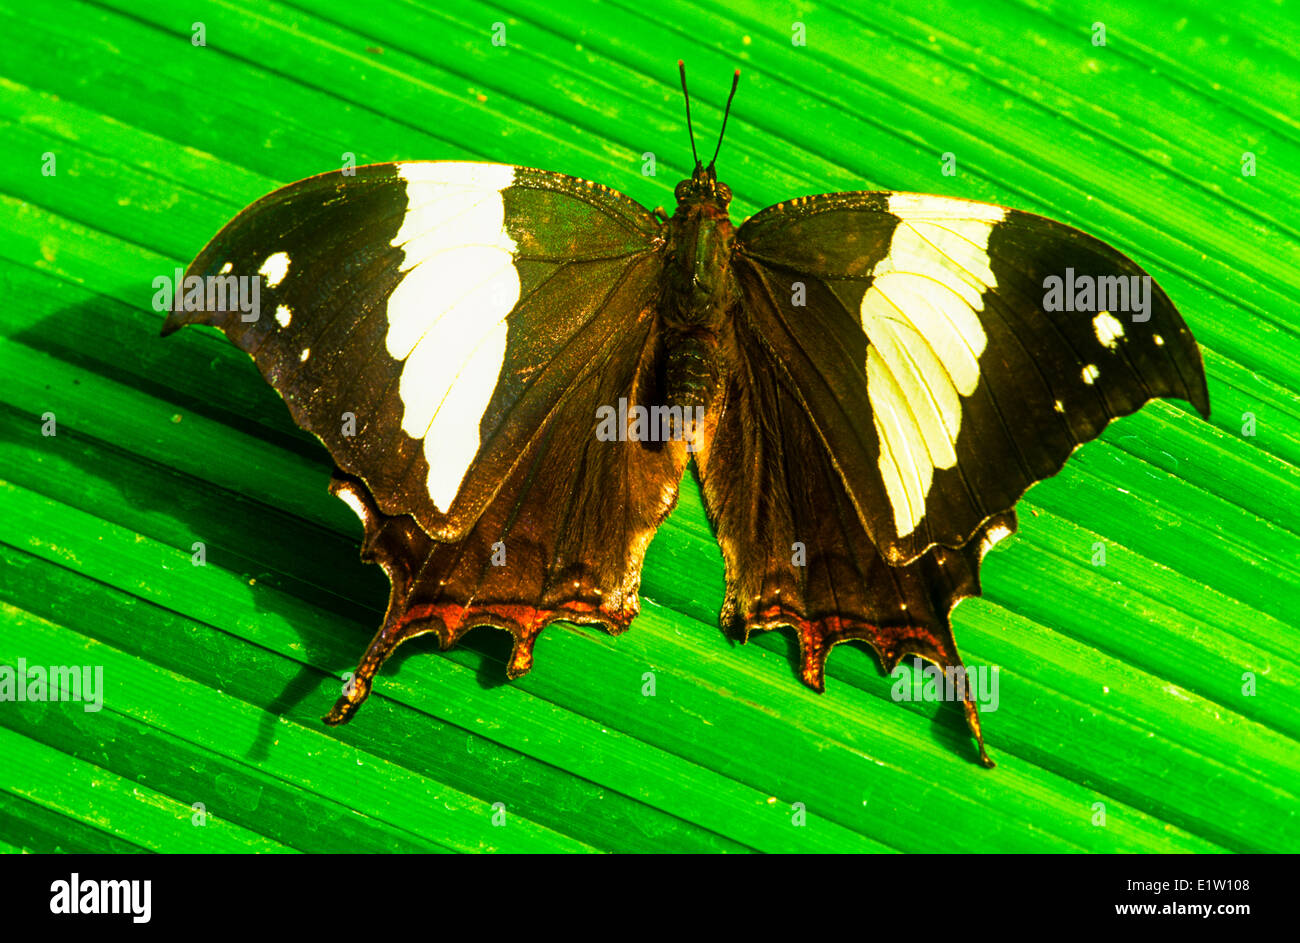 Marbled Leafwing or Silver-studded Leafwing butterfly (Hypna clytemnestra clytemnestra) dorsal view Mexico to the Amazon Basin. Stock Photo